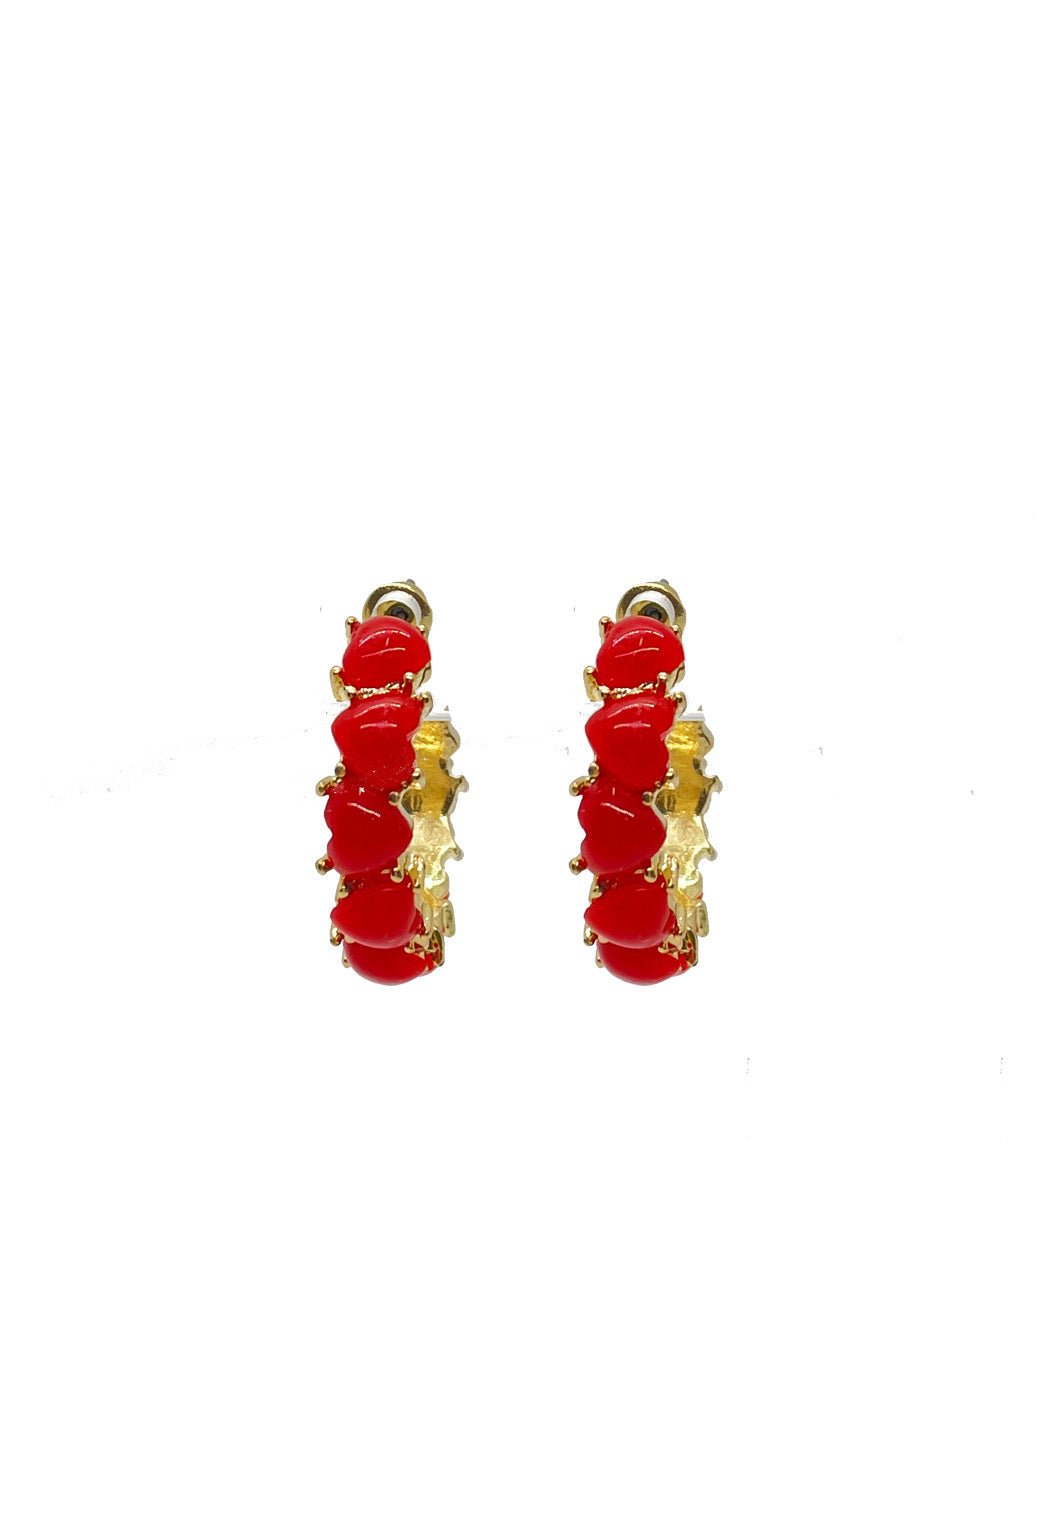 Red Hot Heart Hoops - Red